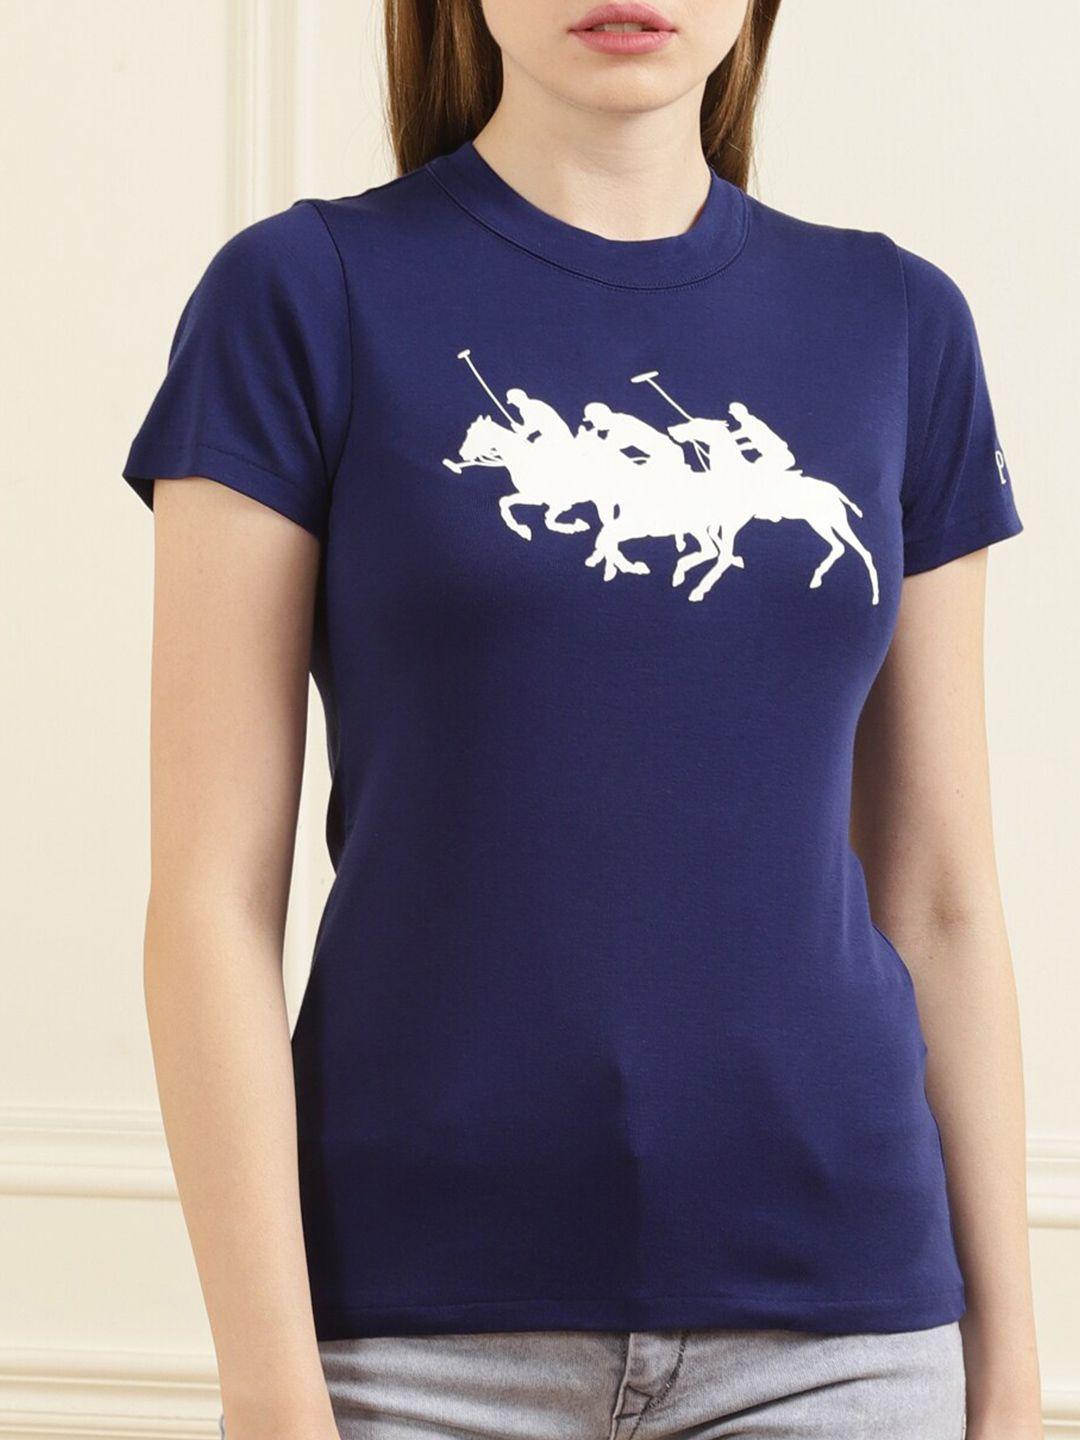 polo ralph lauren blue graphic printed top